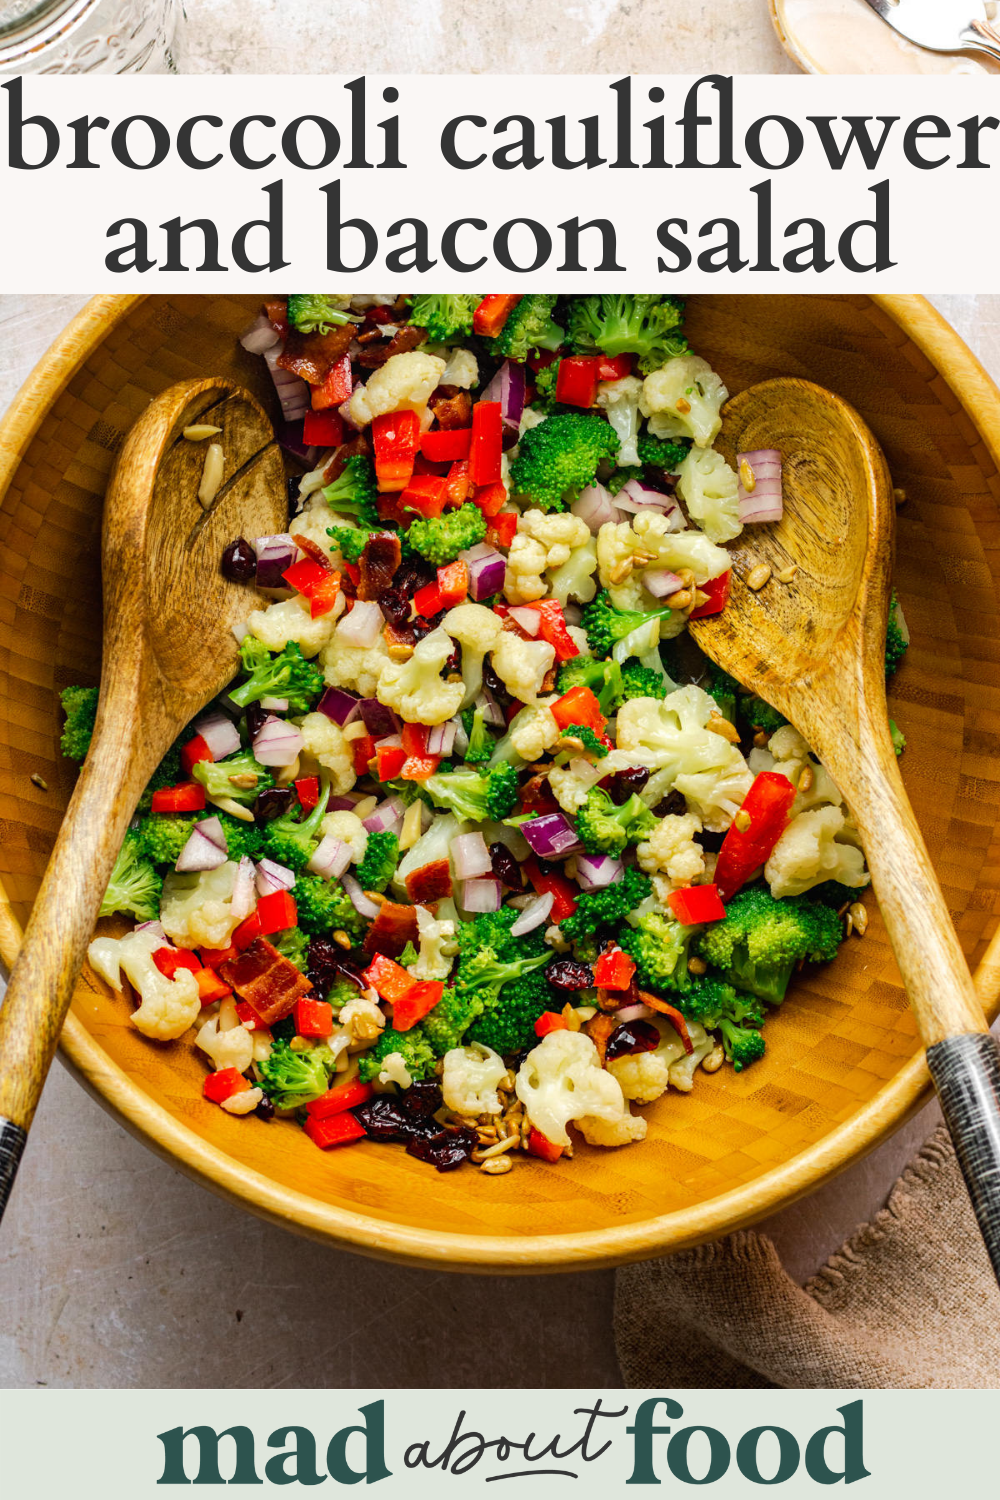 Image for pinning Broccoli Cauliflower and Bacon Salad recipe on Pinterst